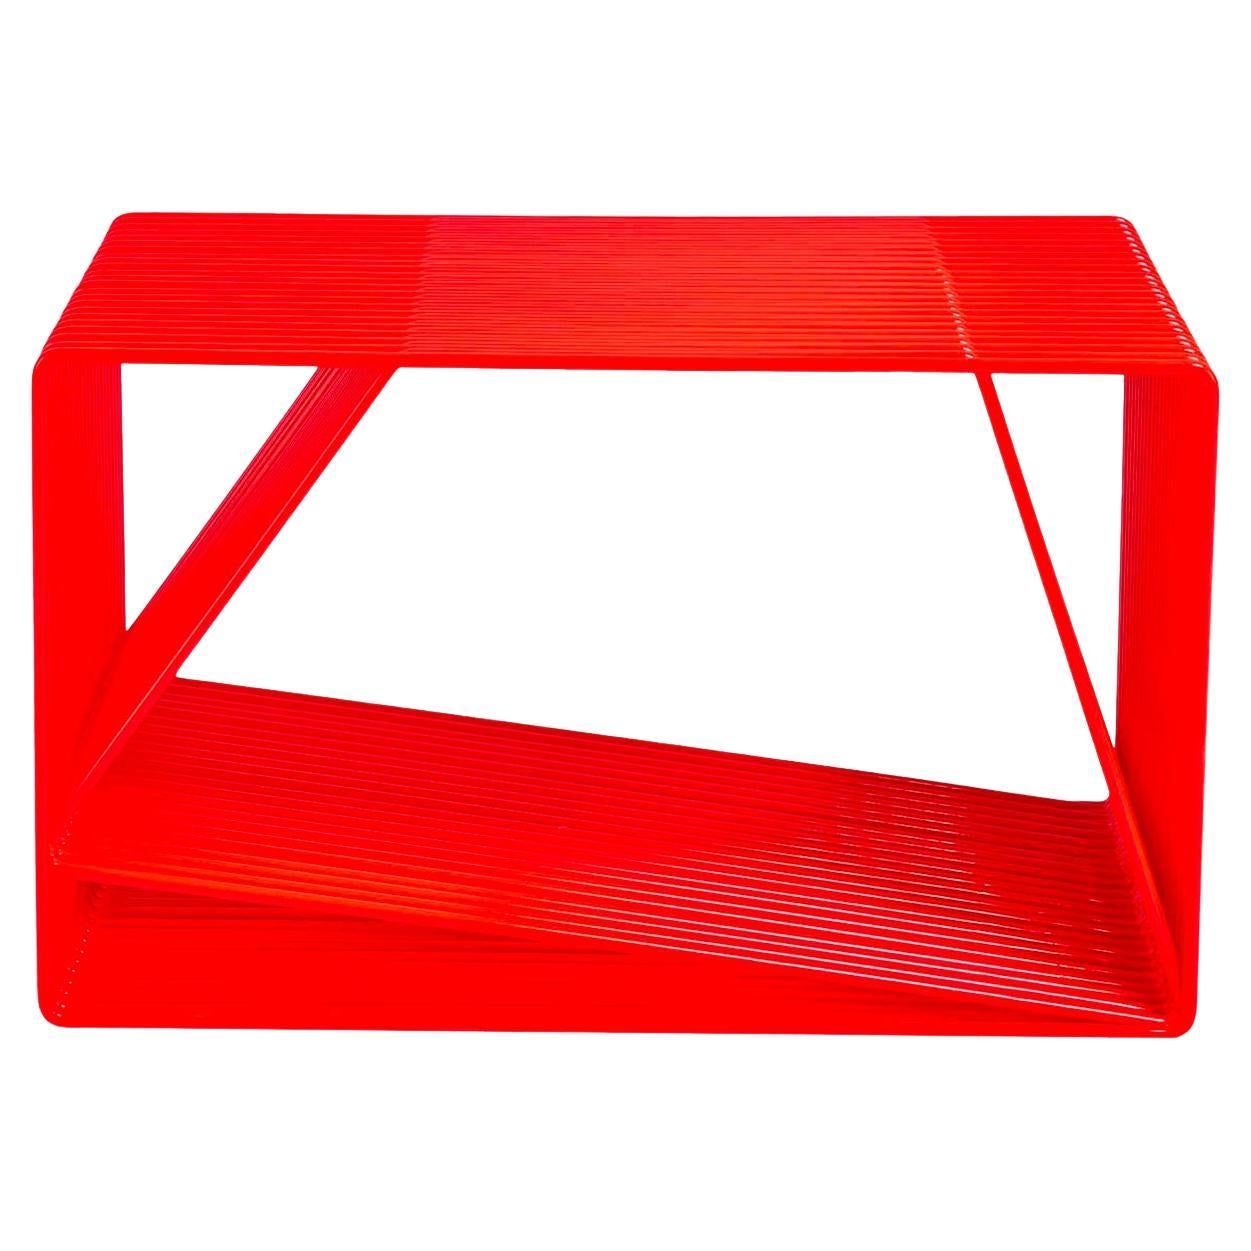 LOOP - Contemporary Minimal Geometric Steel Rod Side Table by TJOKEEFE In New Condition For Sale In Chicago, IL